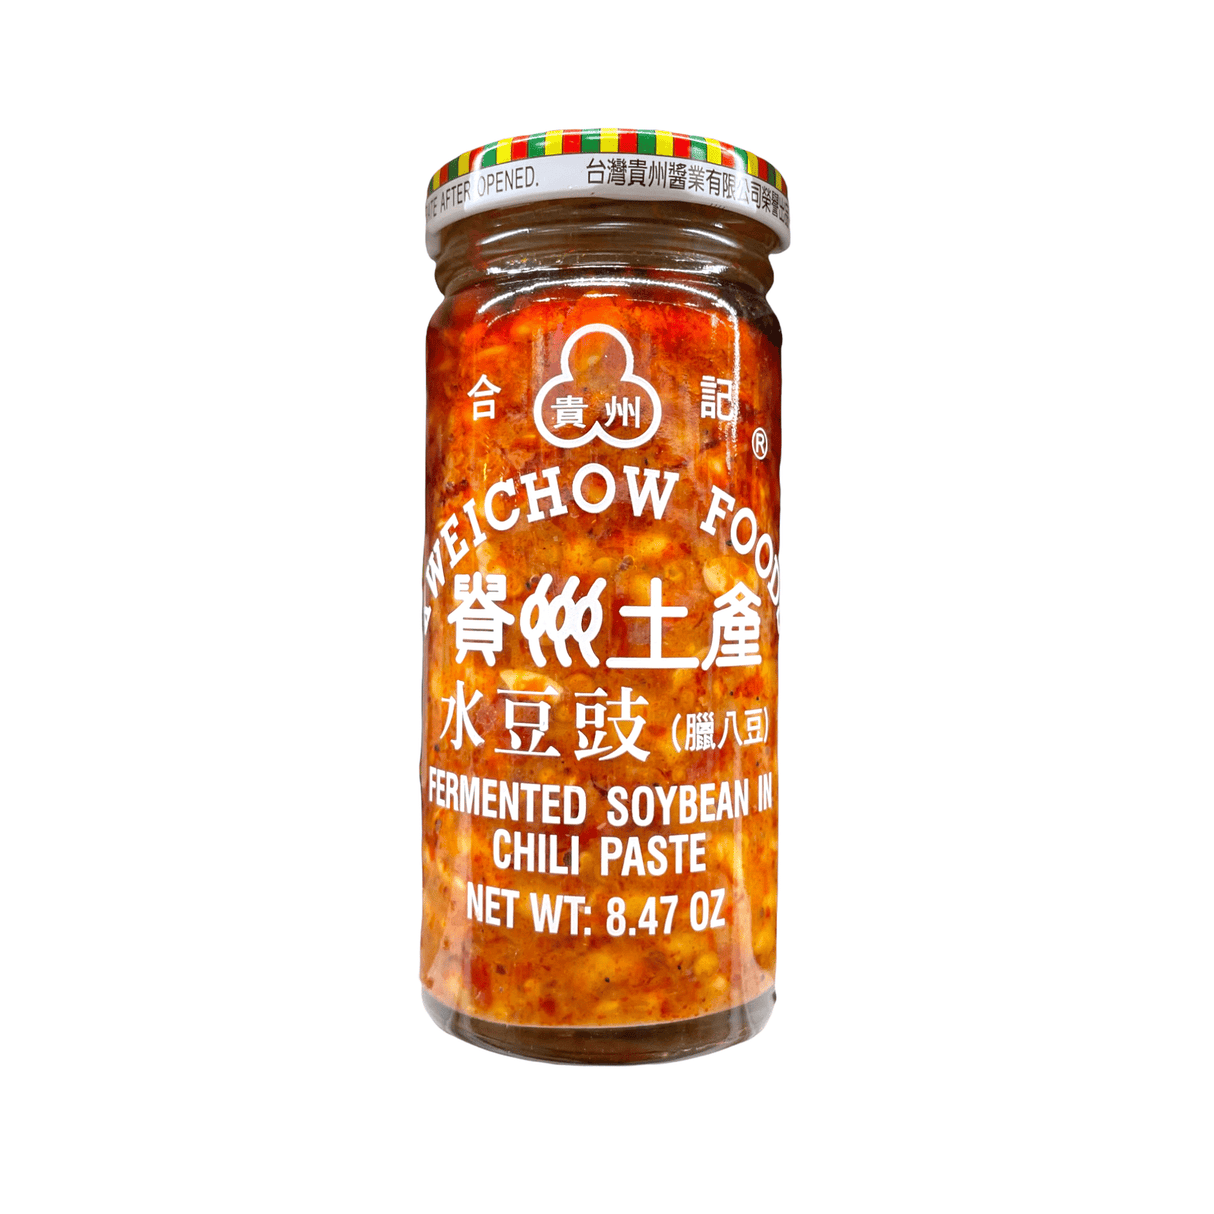 Kwechow Foods Fermented Soybean in Chili Paste